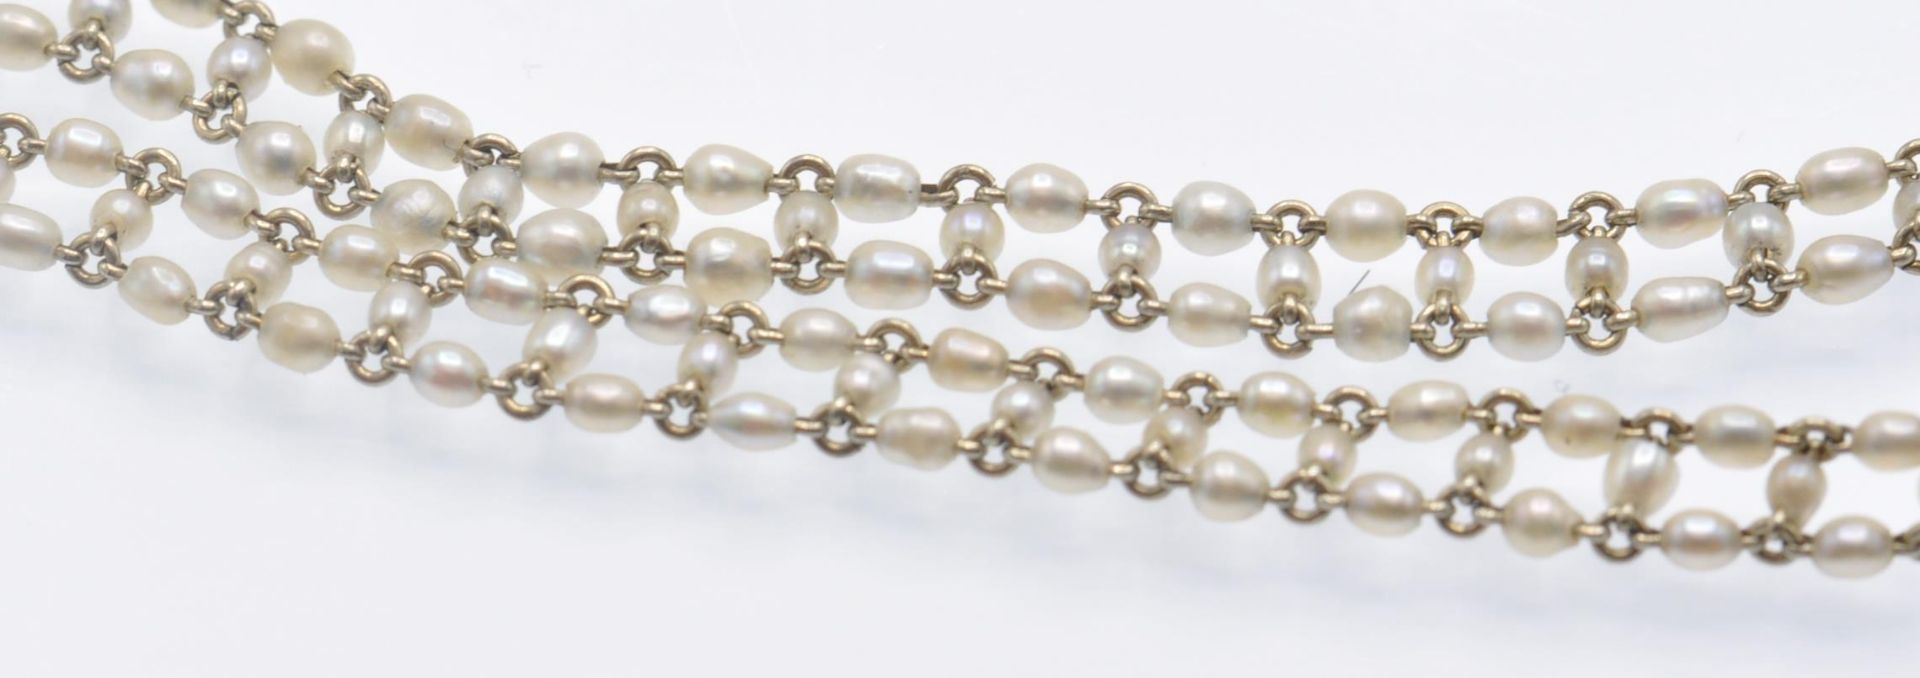 An 18ct Gold & Seed Pearl Choker Necklace - Image 6 of 6